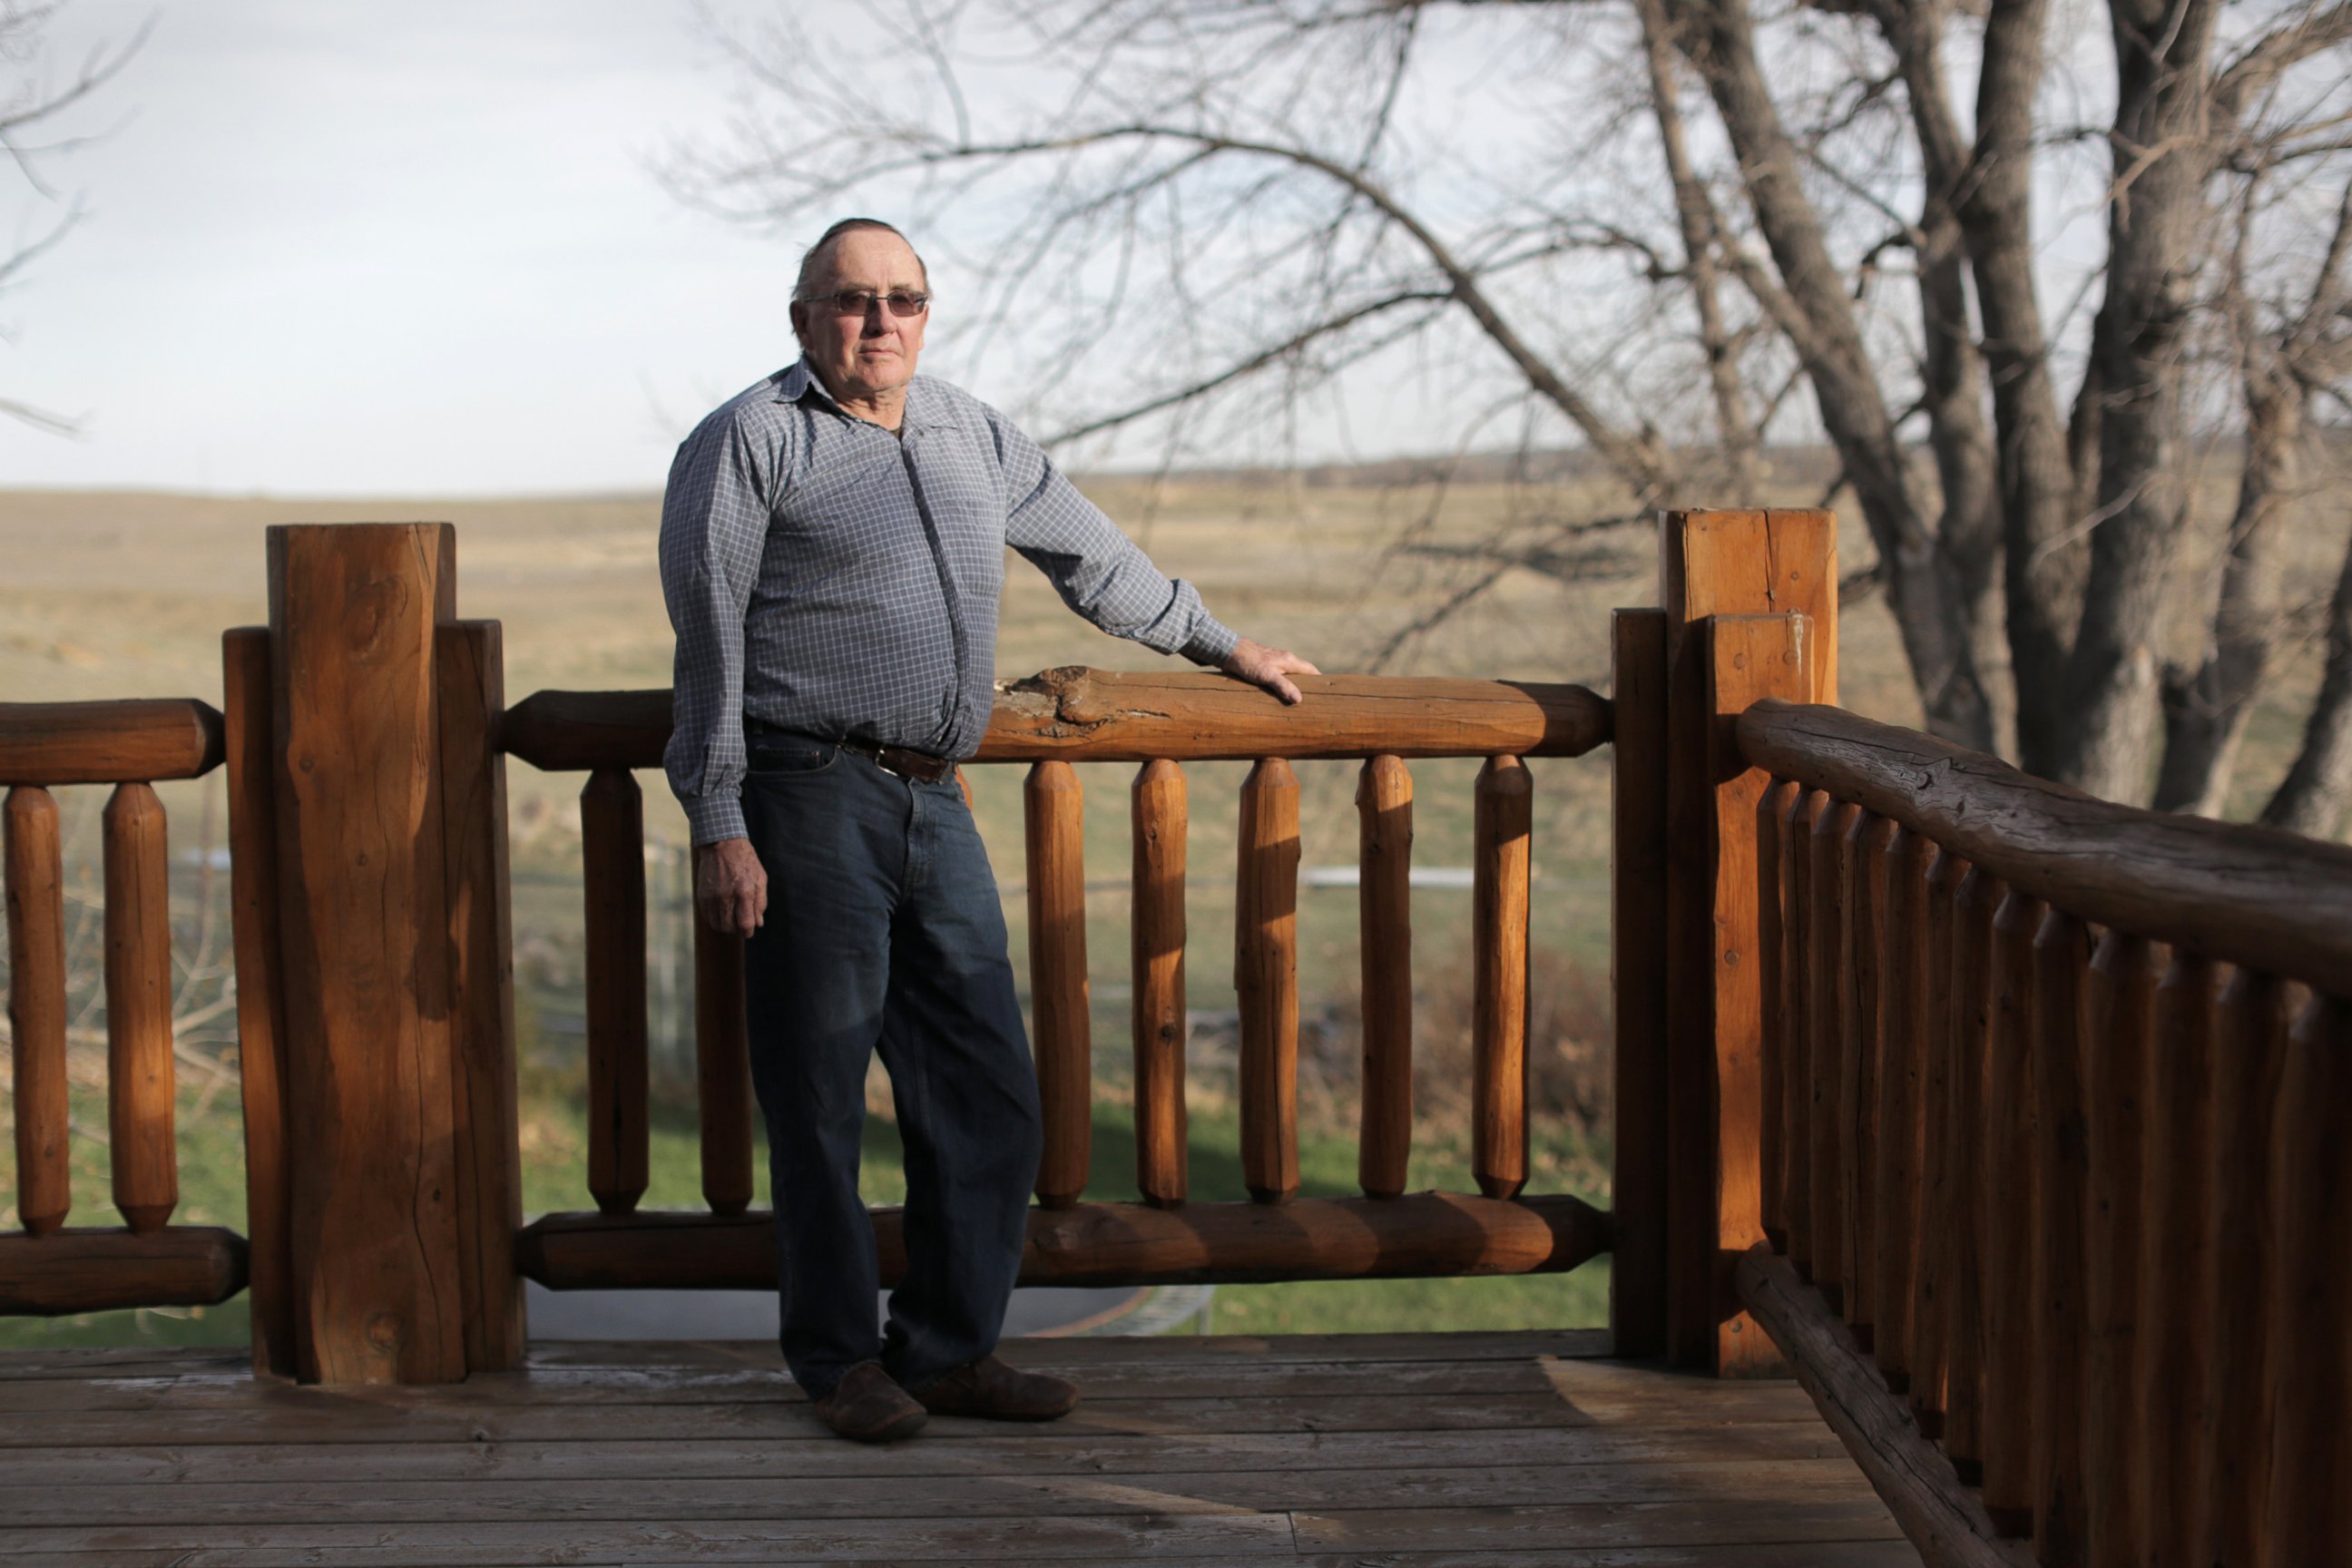 PHOTO: L.J. Turner’s family has had their ranch in Gillette for nearly a century. He is one of the few vocal critics in the area who take issue with the impact that coal mining has on the local environment.